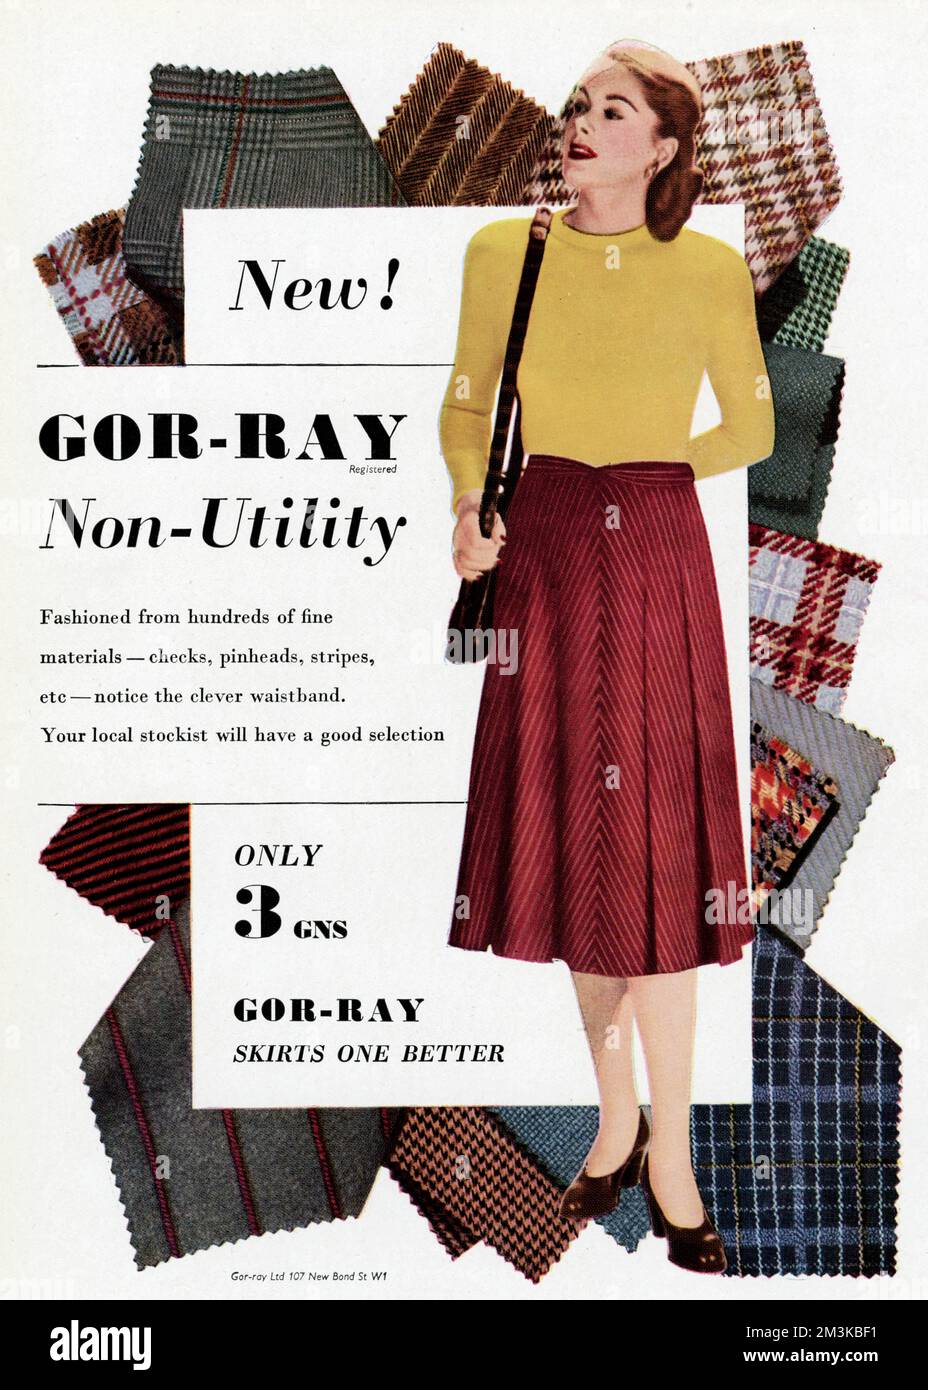 Fashionable from hundreds of fine materials - checks, pinheads, stripes, ect - notice the clever waistband .  1948 Stock Photo